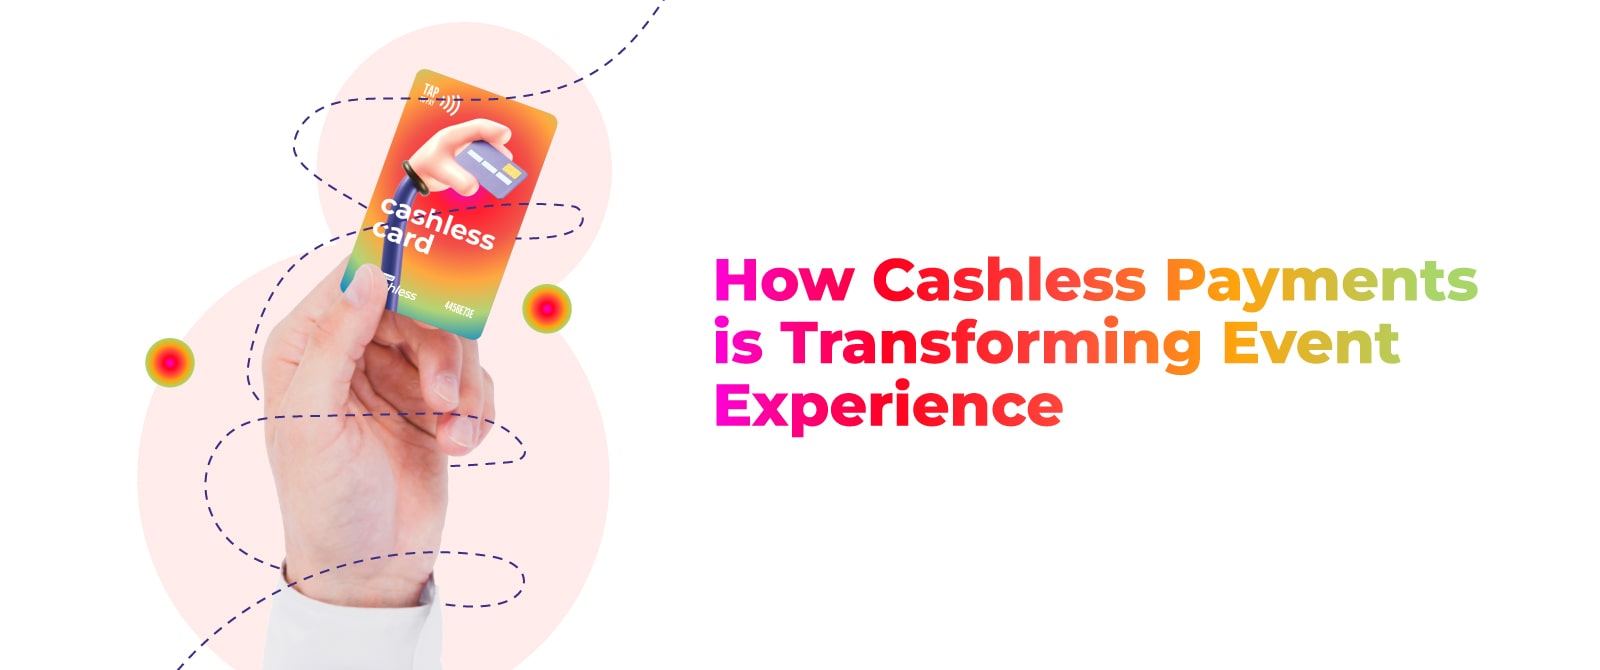 How Cashless Payments is Transforming Event Experience